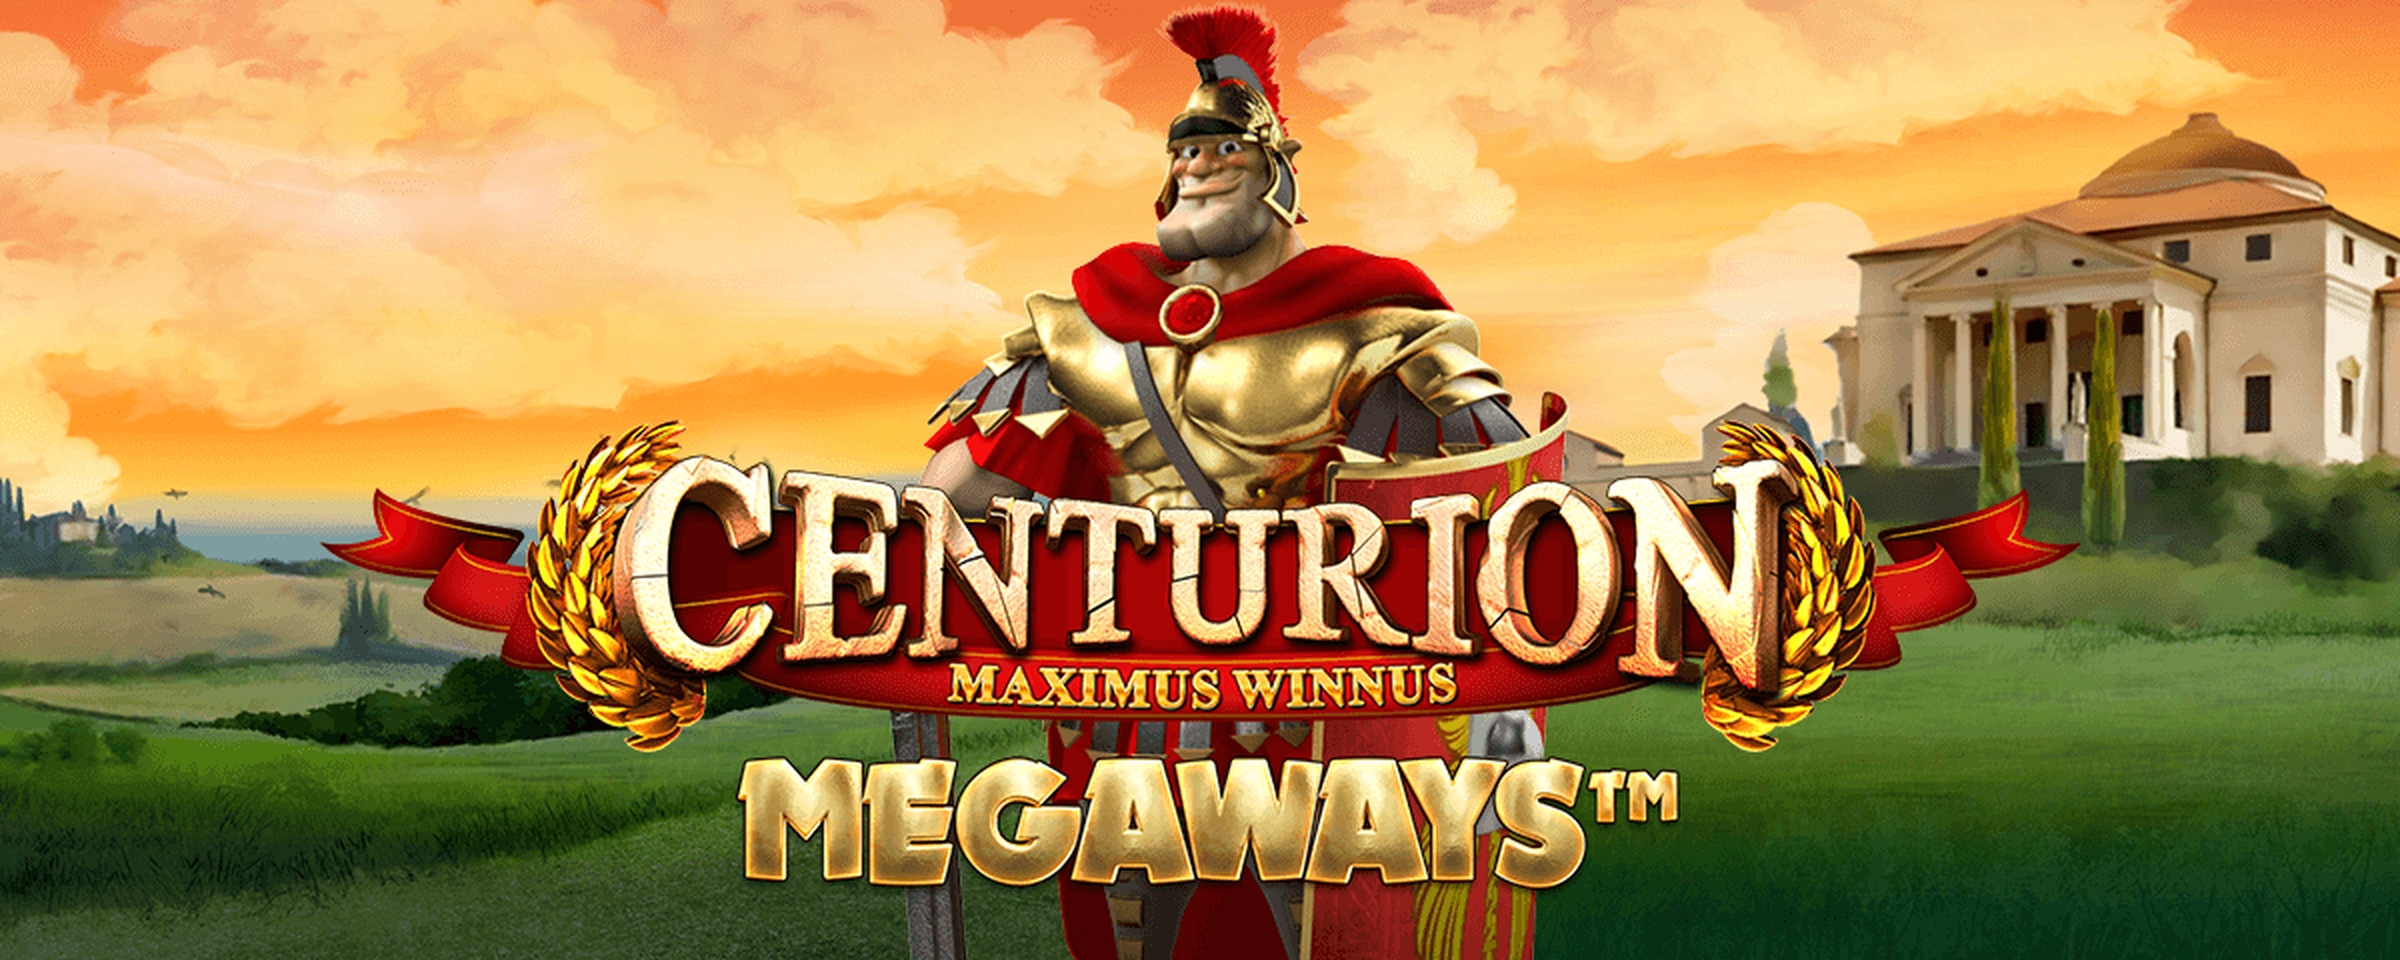 The Centurion Online Slot Demo Game by Inspired Gaming